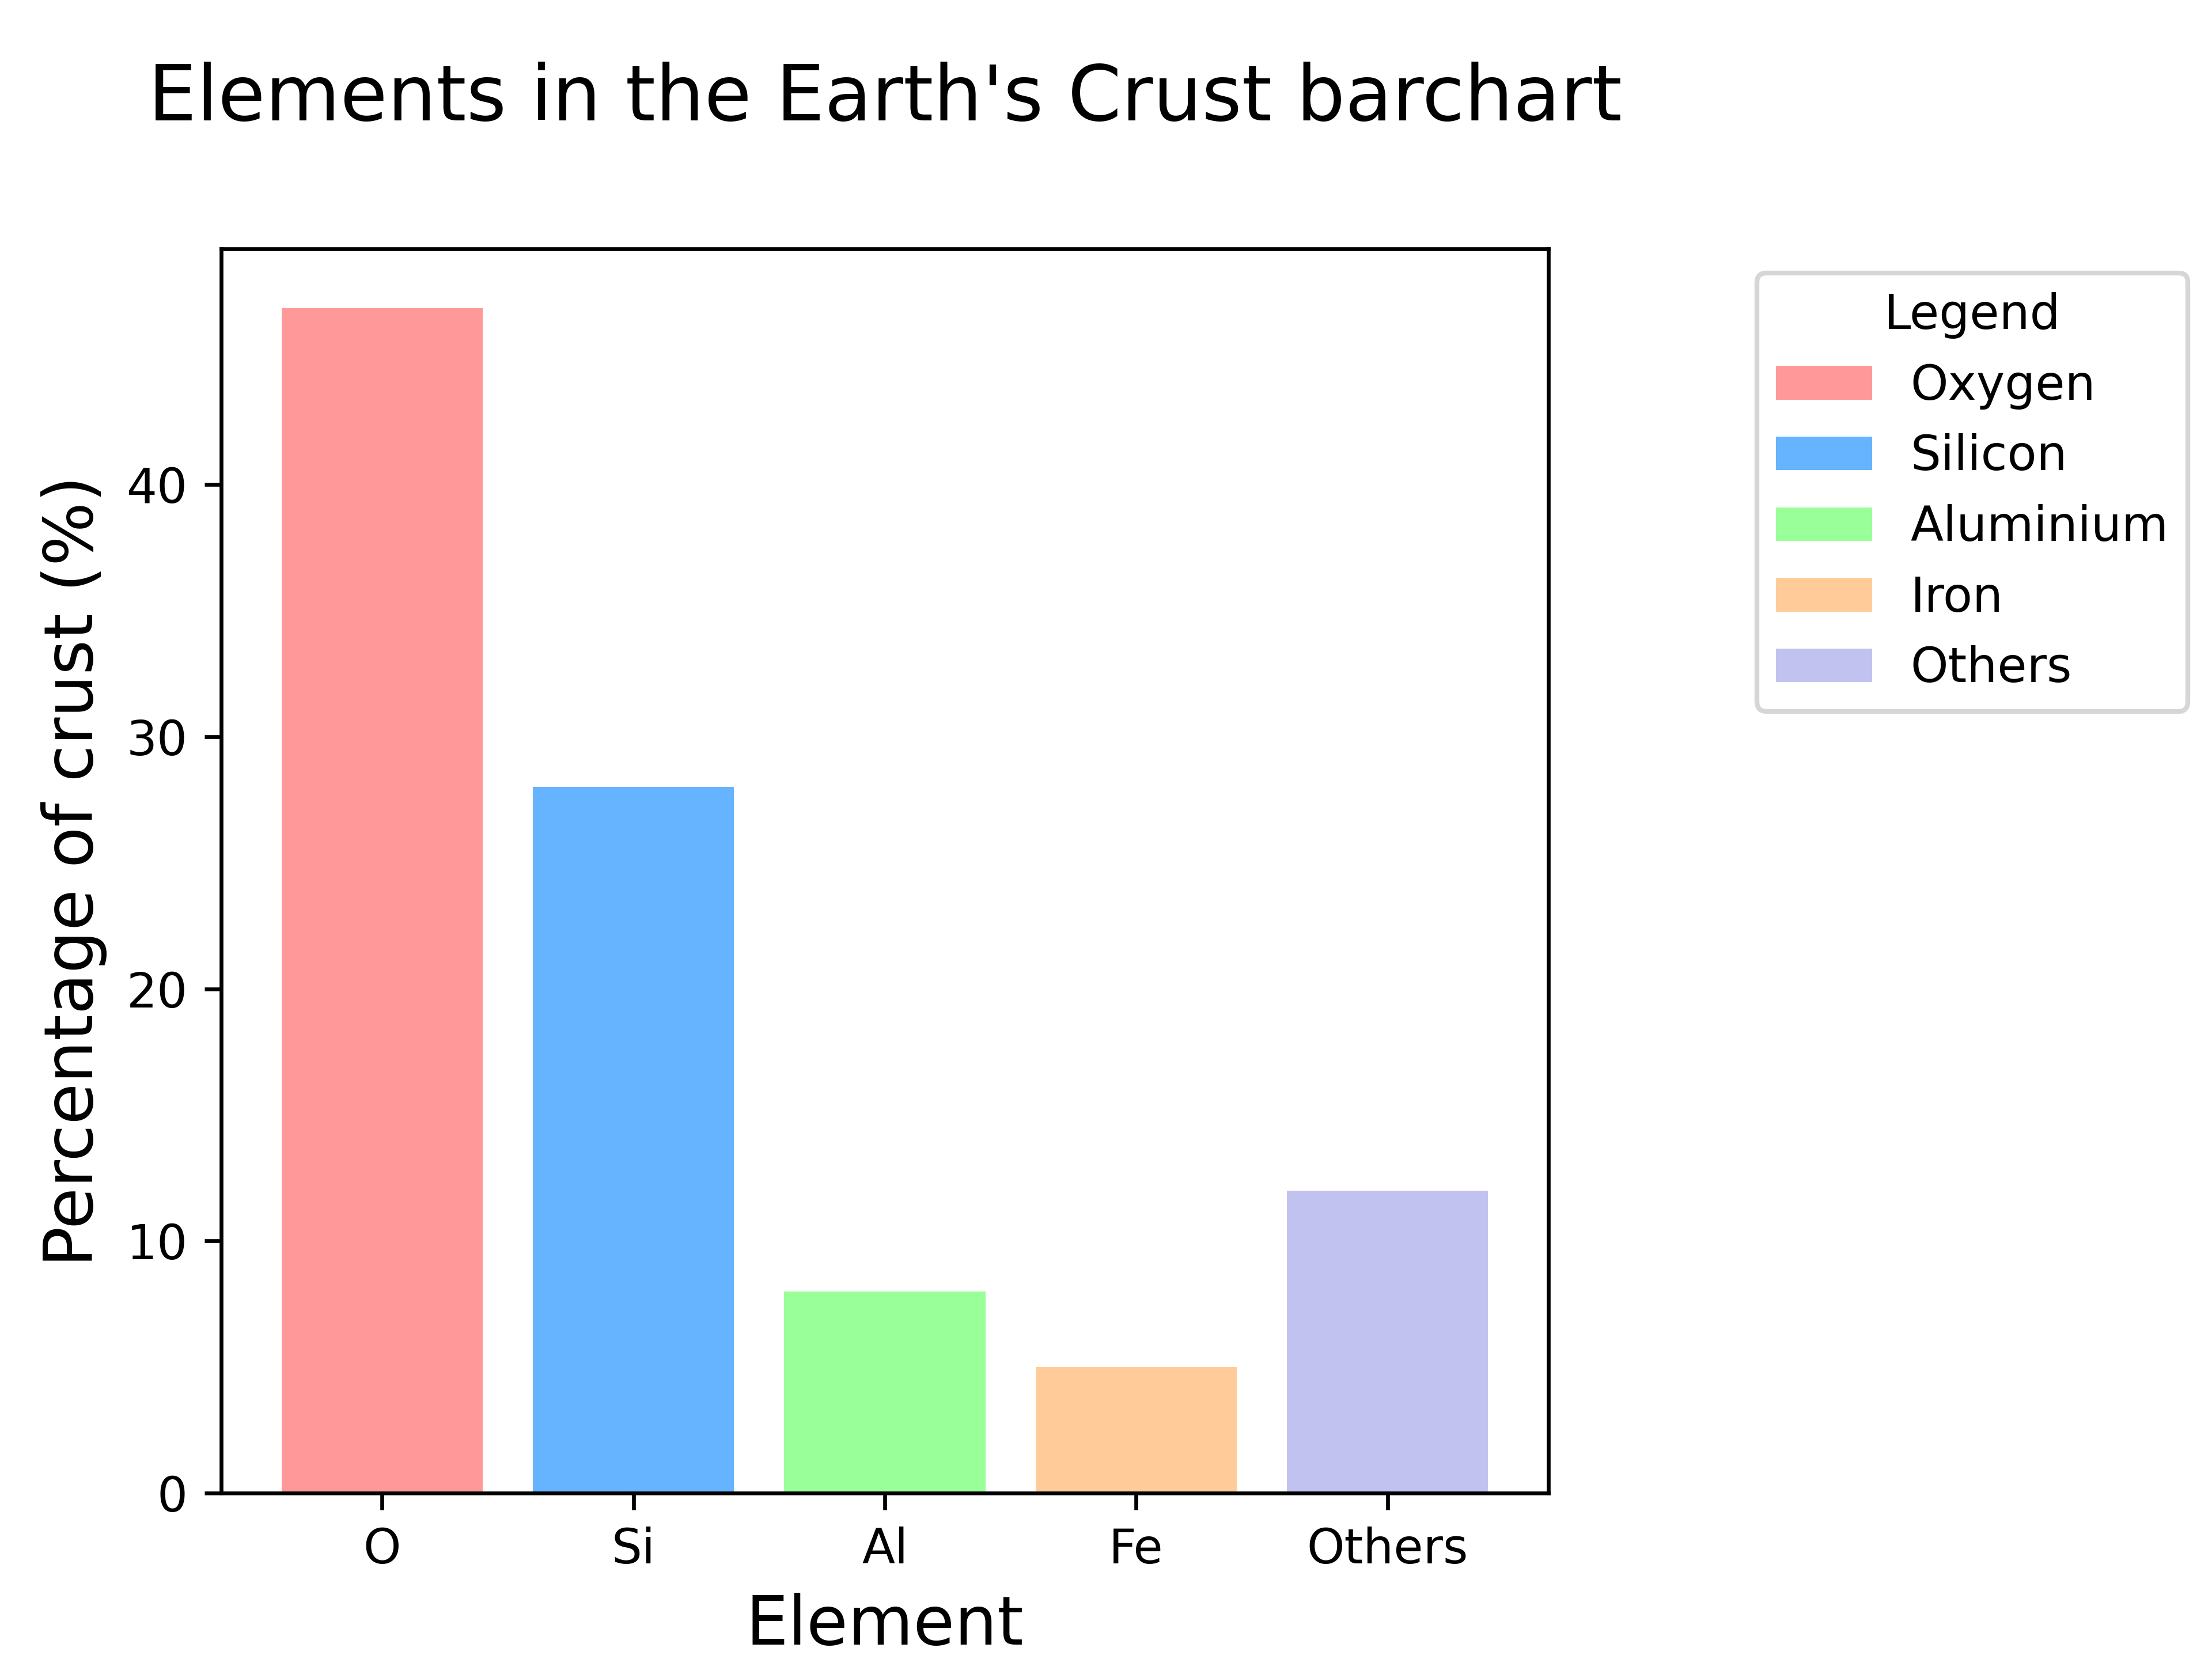 ../_images/Elements_in_the_Earth%27s_Crust_barchart.png